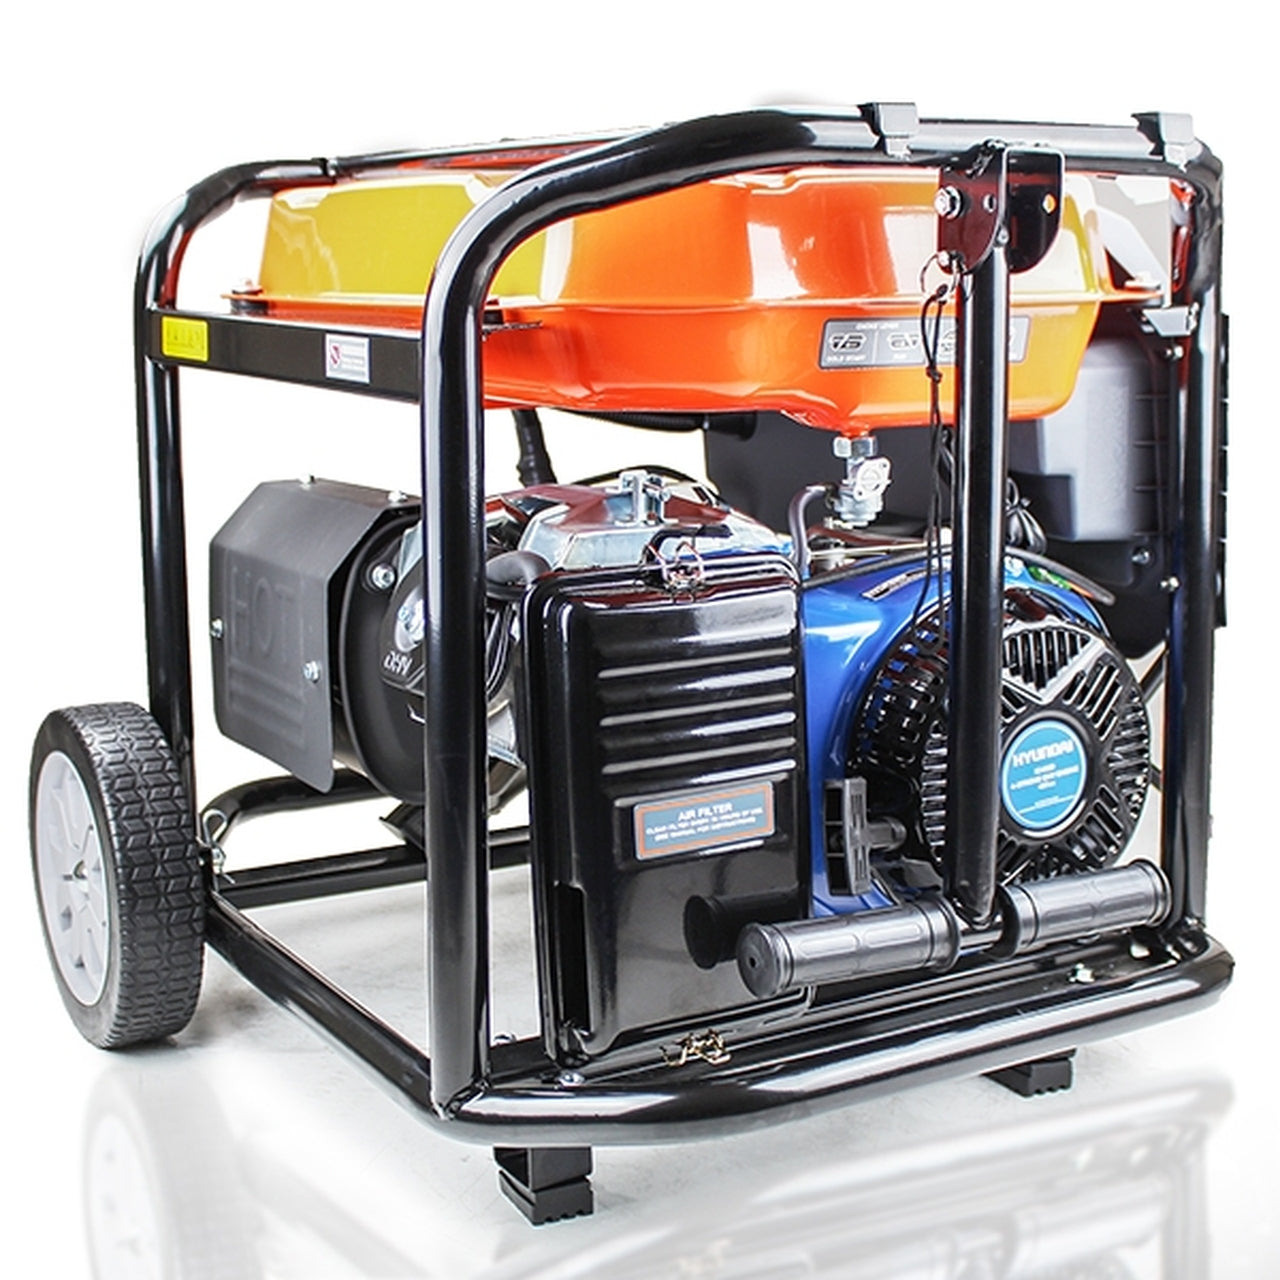 P10000LE P1PE Recoil and Electric Start Site Petrol Generator - Powered by Hyundai - 7.9kW / 9.8kVA